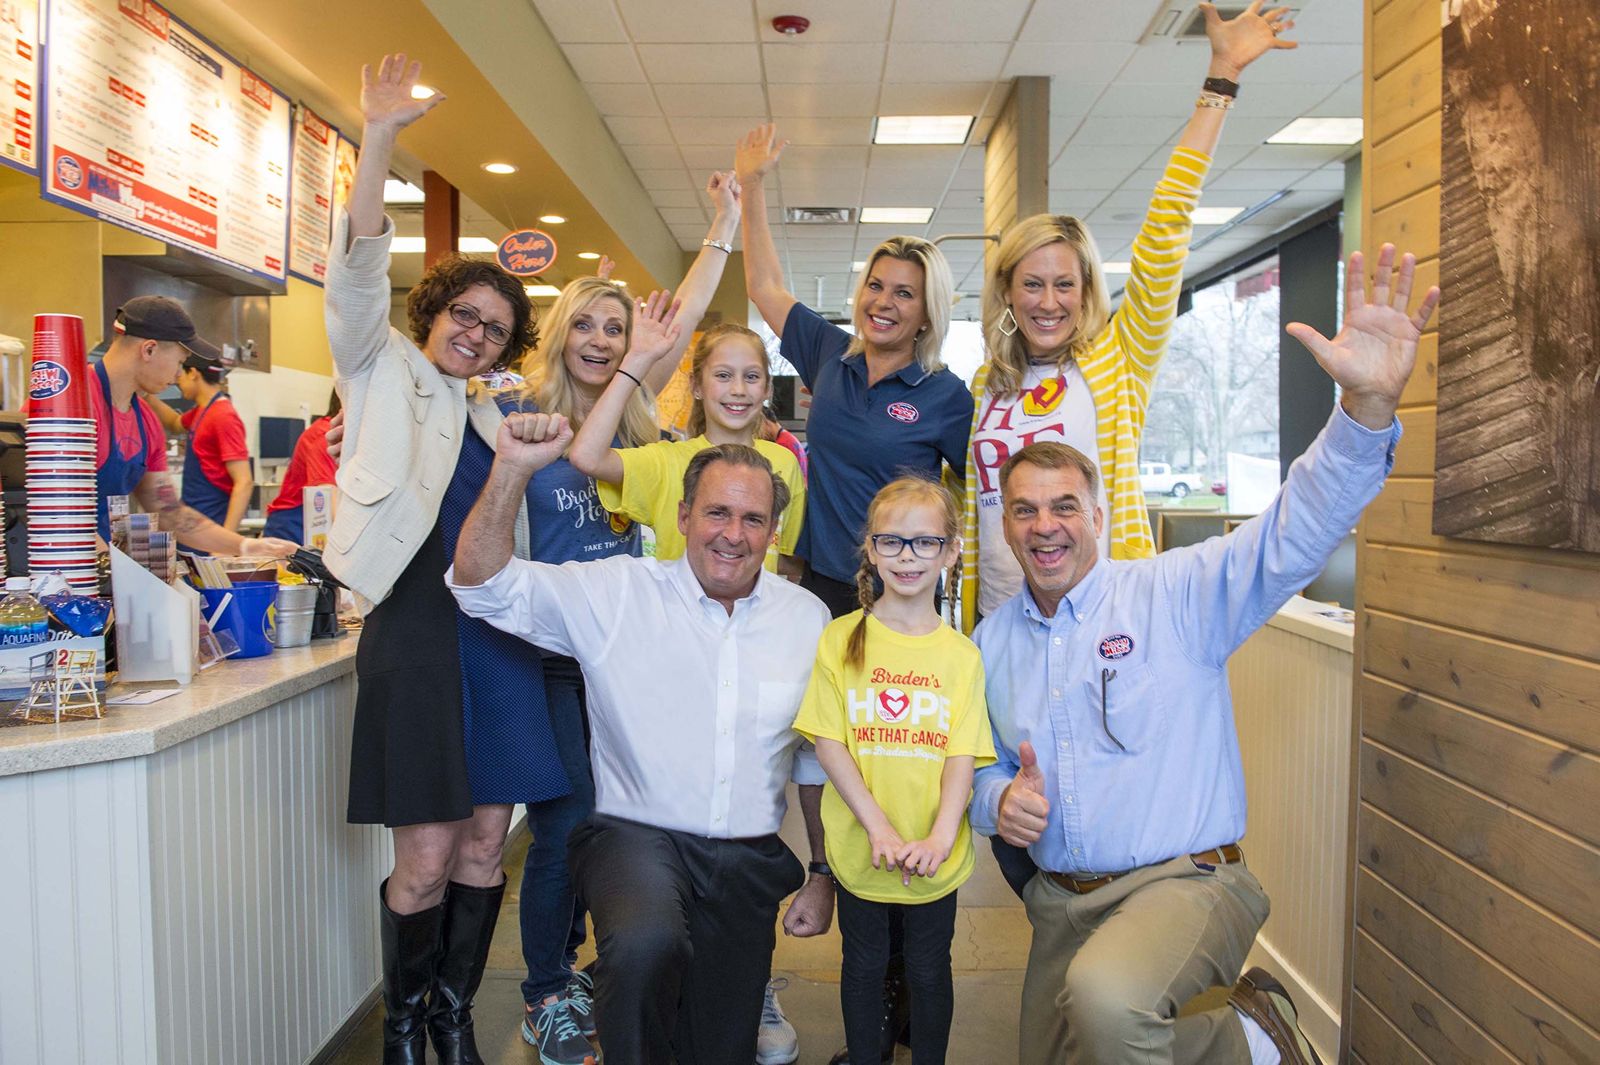 Jersey Mike’s Founder & CEO Peter Cancro (kneeling, left) celebrated the company’s 8th Annual Day of Giving with Callyn Stanley (front center) and Area Director Mike Spiegel at the Olathe, Kansas, restaurant. They were joined by (back row, from left) Shelia Montgomery, Deliece Hofen, founder of local charity partner Braden’s Hope, Taylor Stanley, Tatiana Voevodina Cancro, and Kim Stanley.